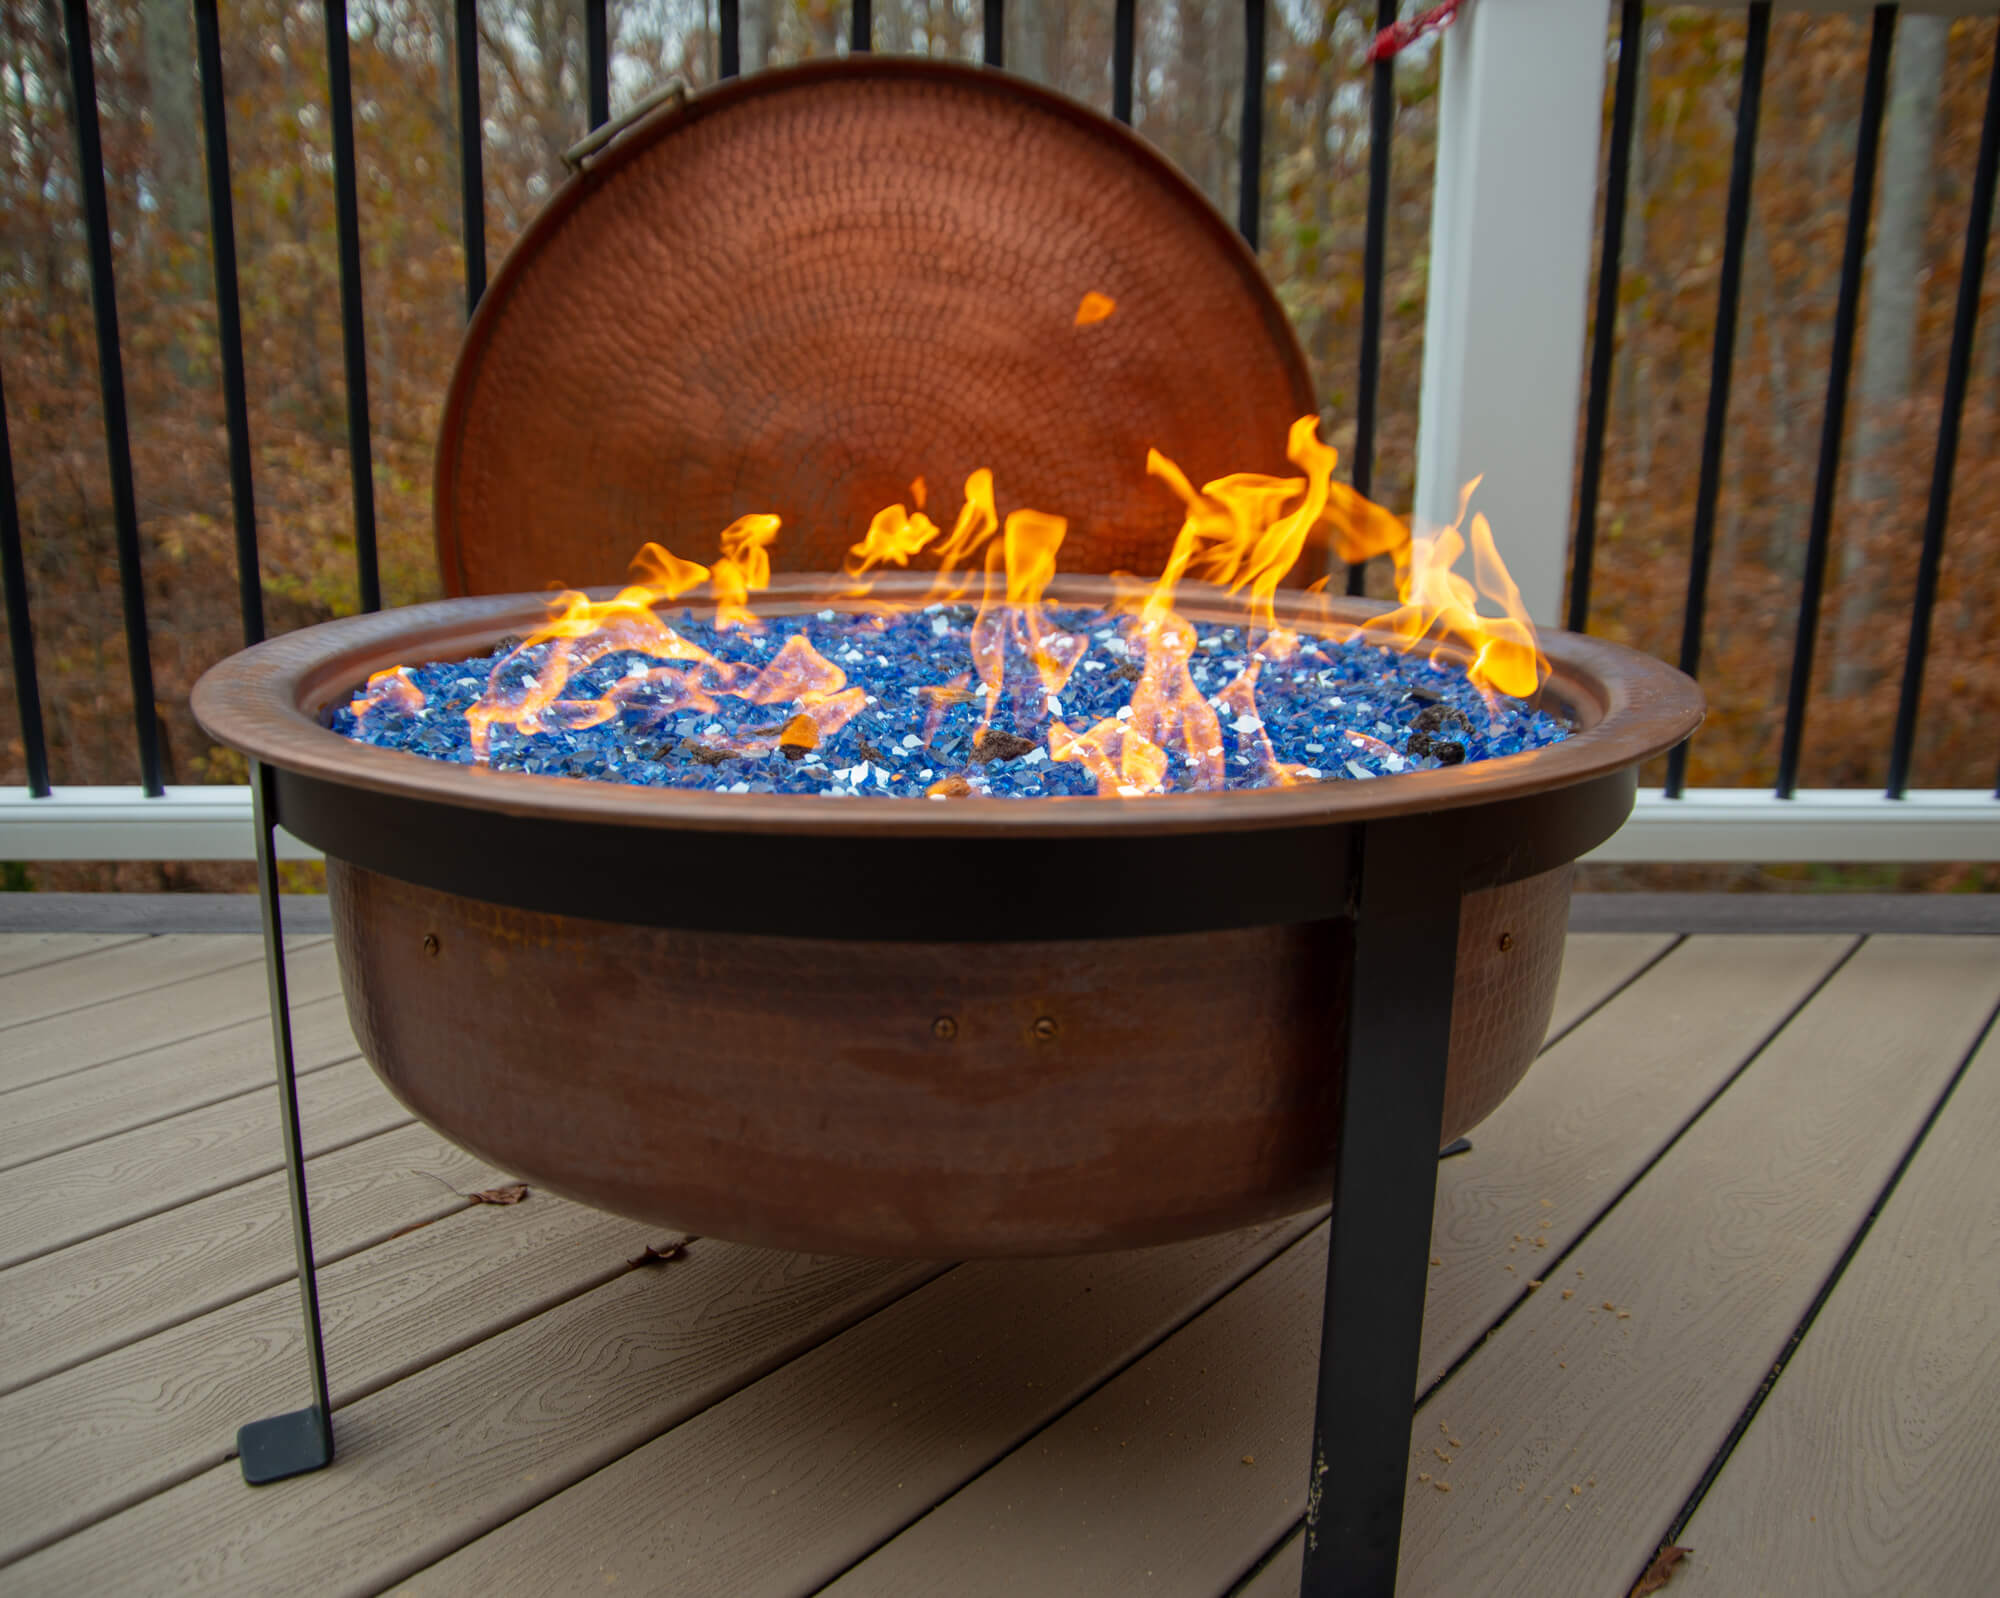 6 Ways To Put A Fire Pit On Wooden Deck, Is It Safe To Have A Propane Fire Pit On Deck